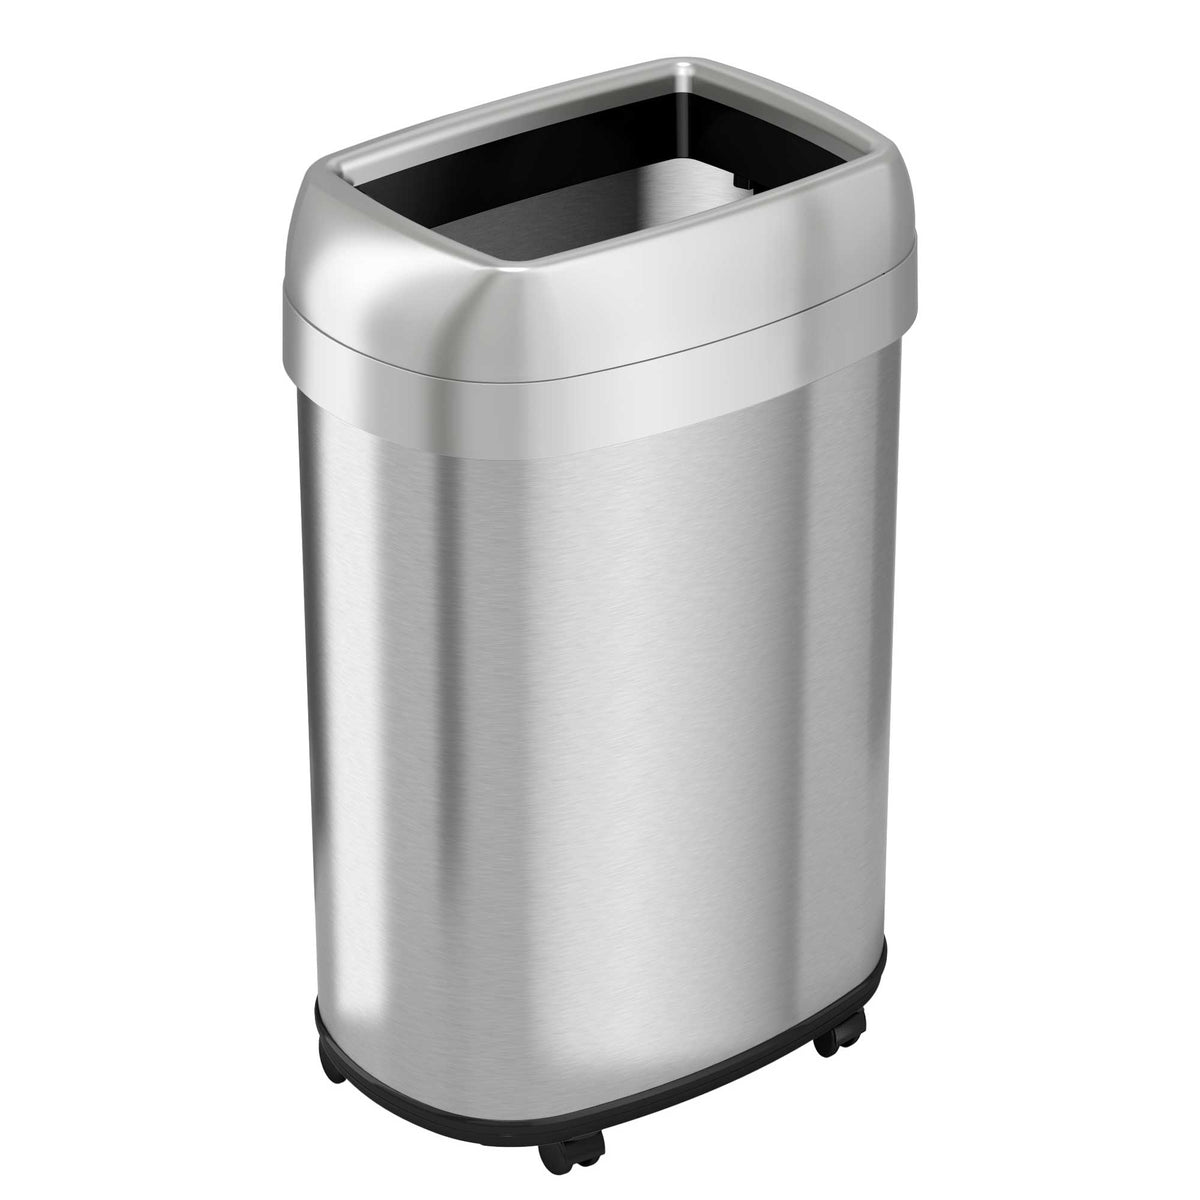 13 Gallon Elliptical Open Top Trash Can with Wheels